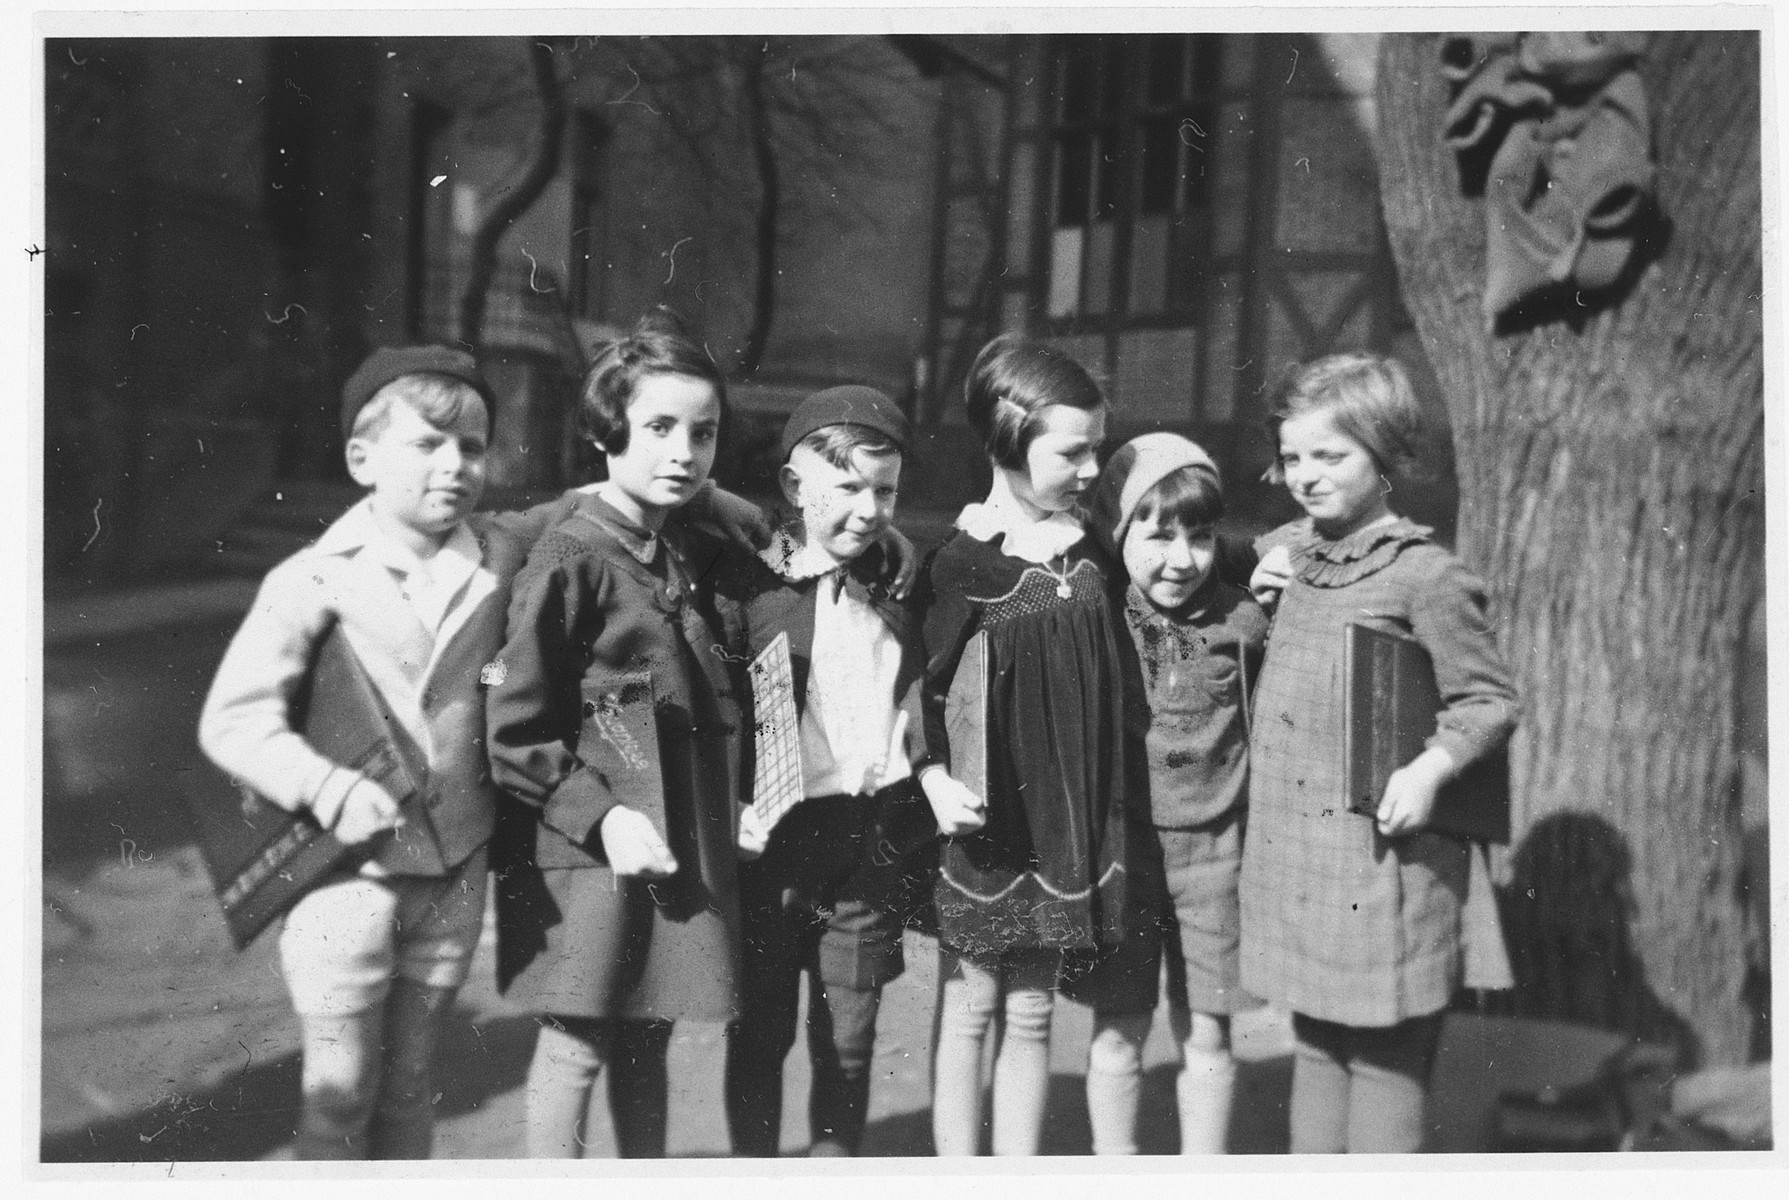 Six school friends pose in a row with their report cards after completing first-grade. 

Those pictured include Hannelore Mansbacher (first from right), Heinz Kleczewski (second from right) and Hanna Frischer (second from left). Only Hannelore Mansbacher survived the war.